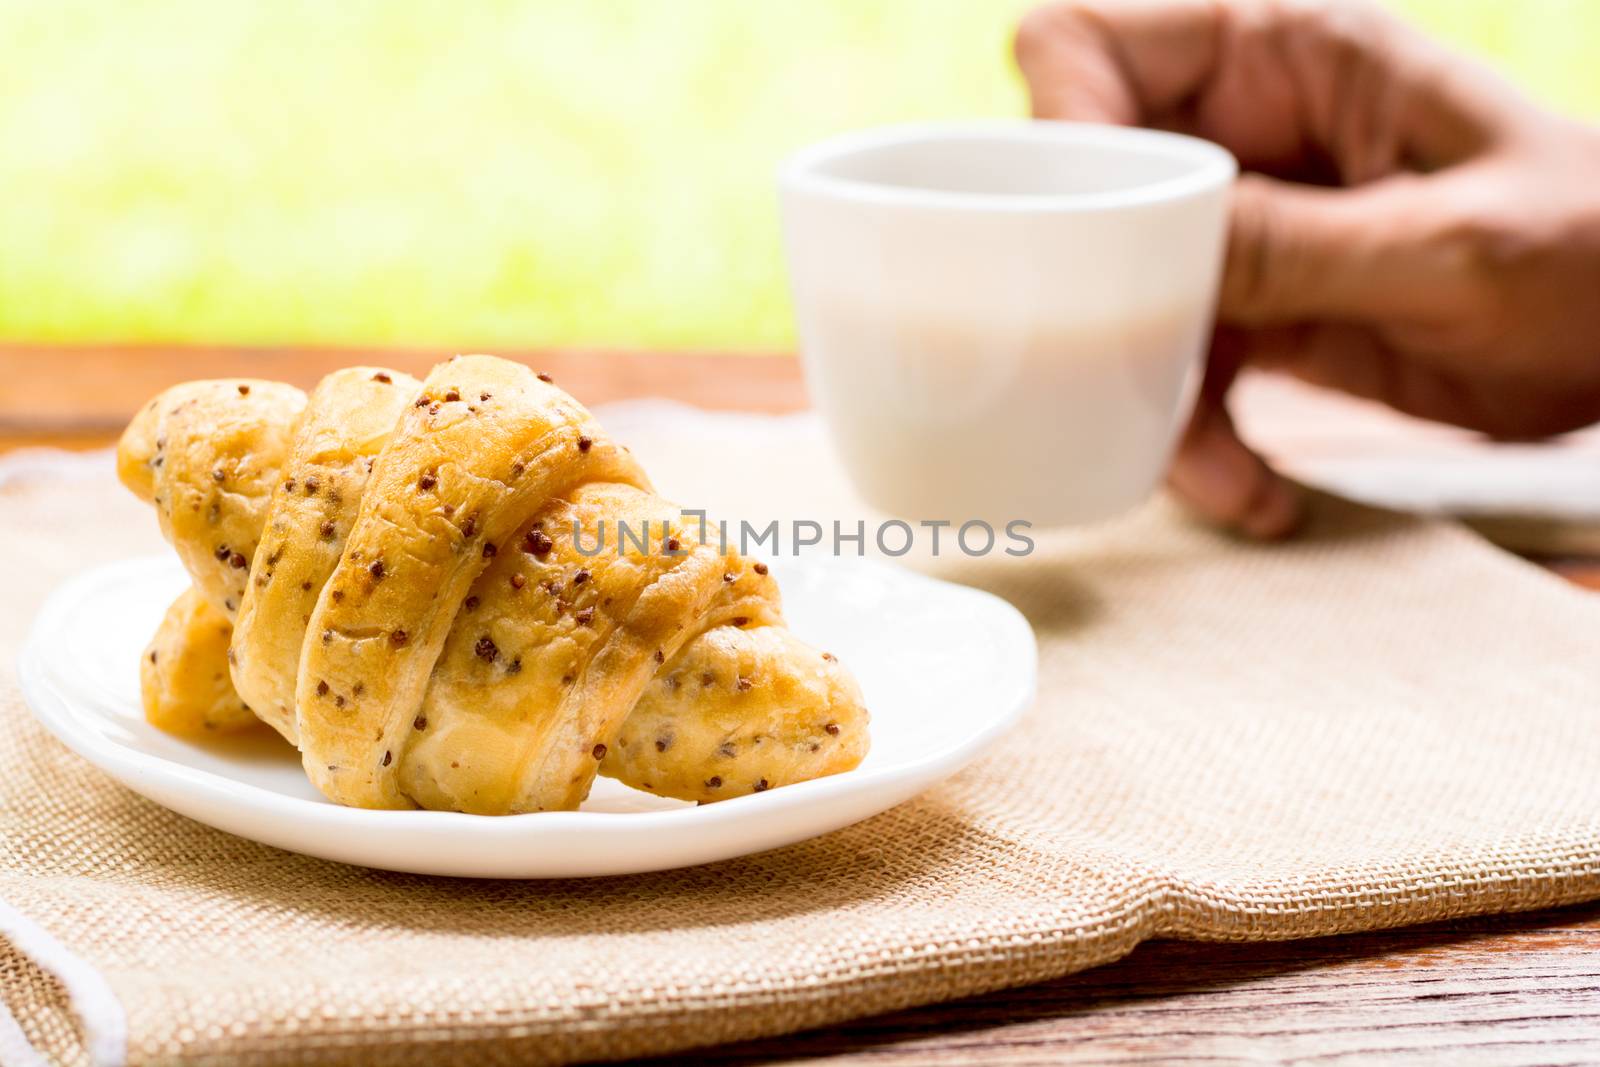 Breakfast concept. Croissants with perilla seeds on white plate and white cup of black coffee on wooden table with green bokeh background.